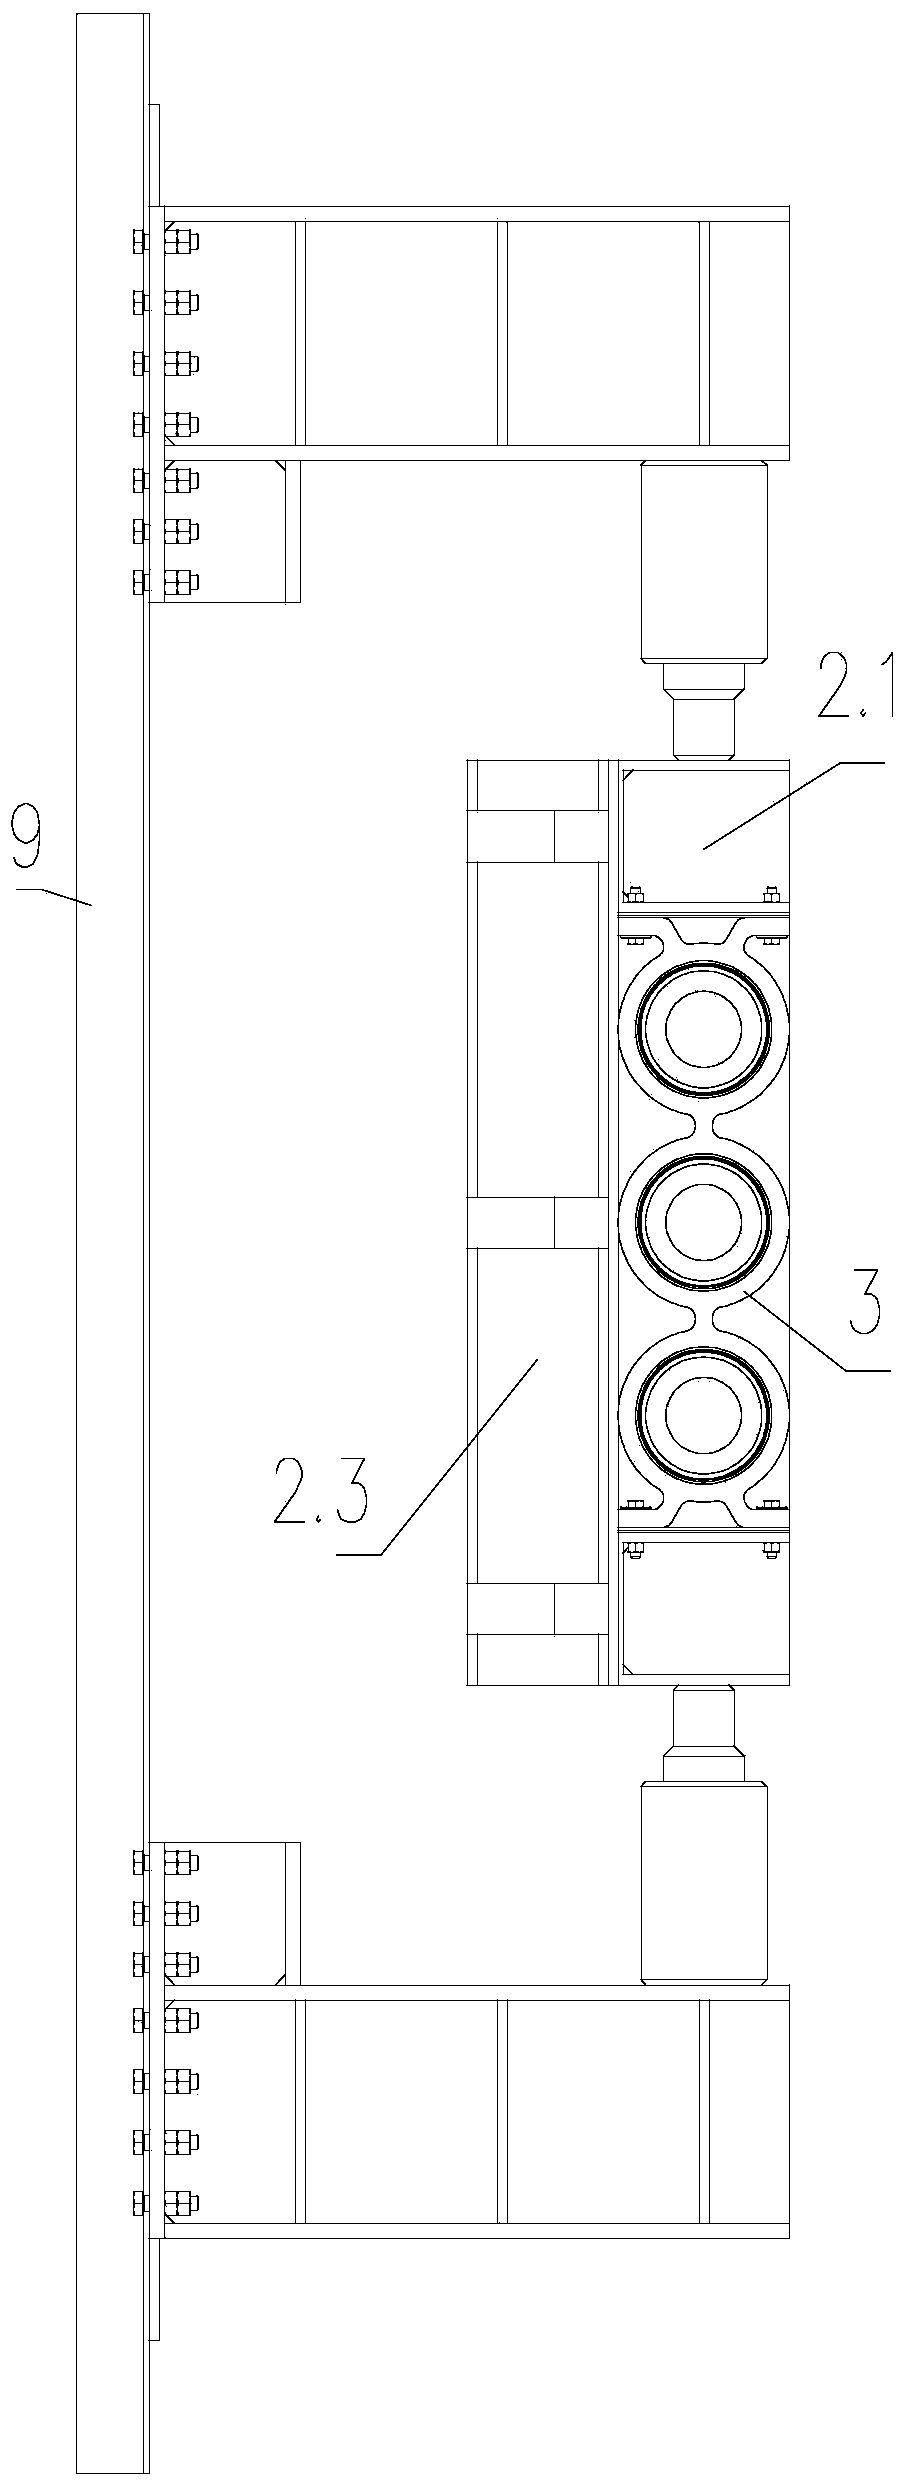 On-way locking device of ship reception chamber of ship lifter